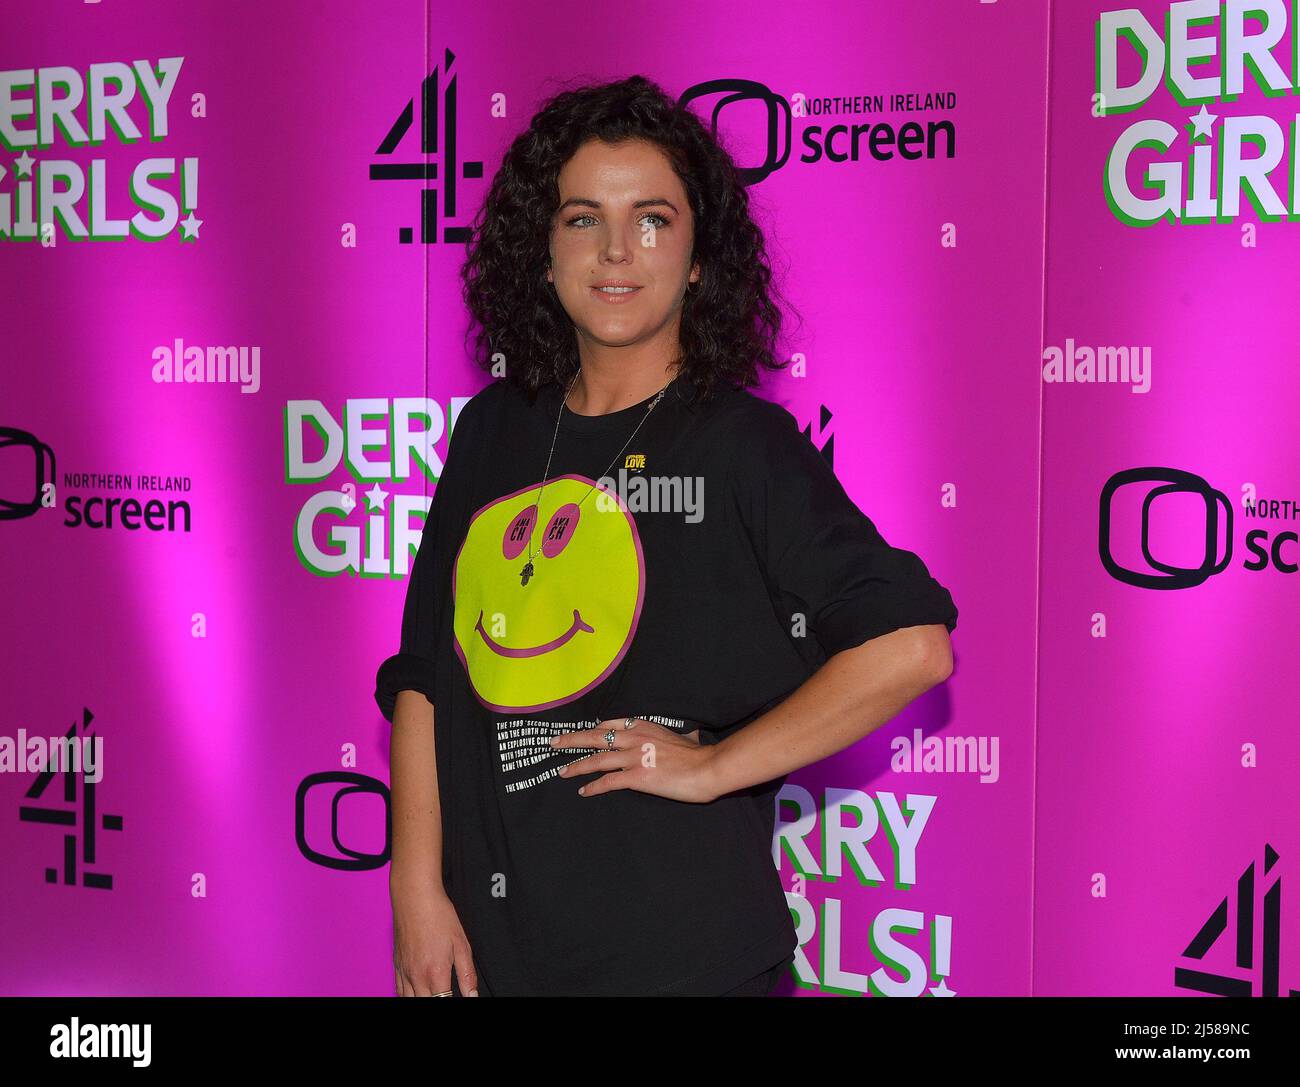 Actor Jamie-Lee O'Donnell attends the premiere of Derry Girls Season 3 in Derry, Londonderry, Northern Ireland, 7 April 2022. ©George Sweeney / Alamy Stock Photo Stock Photo